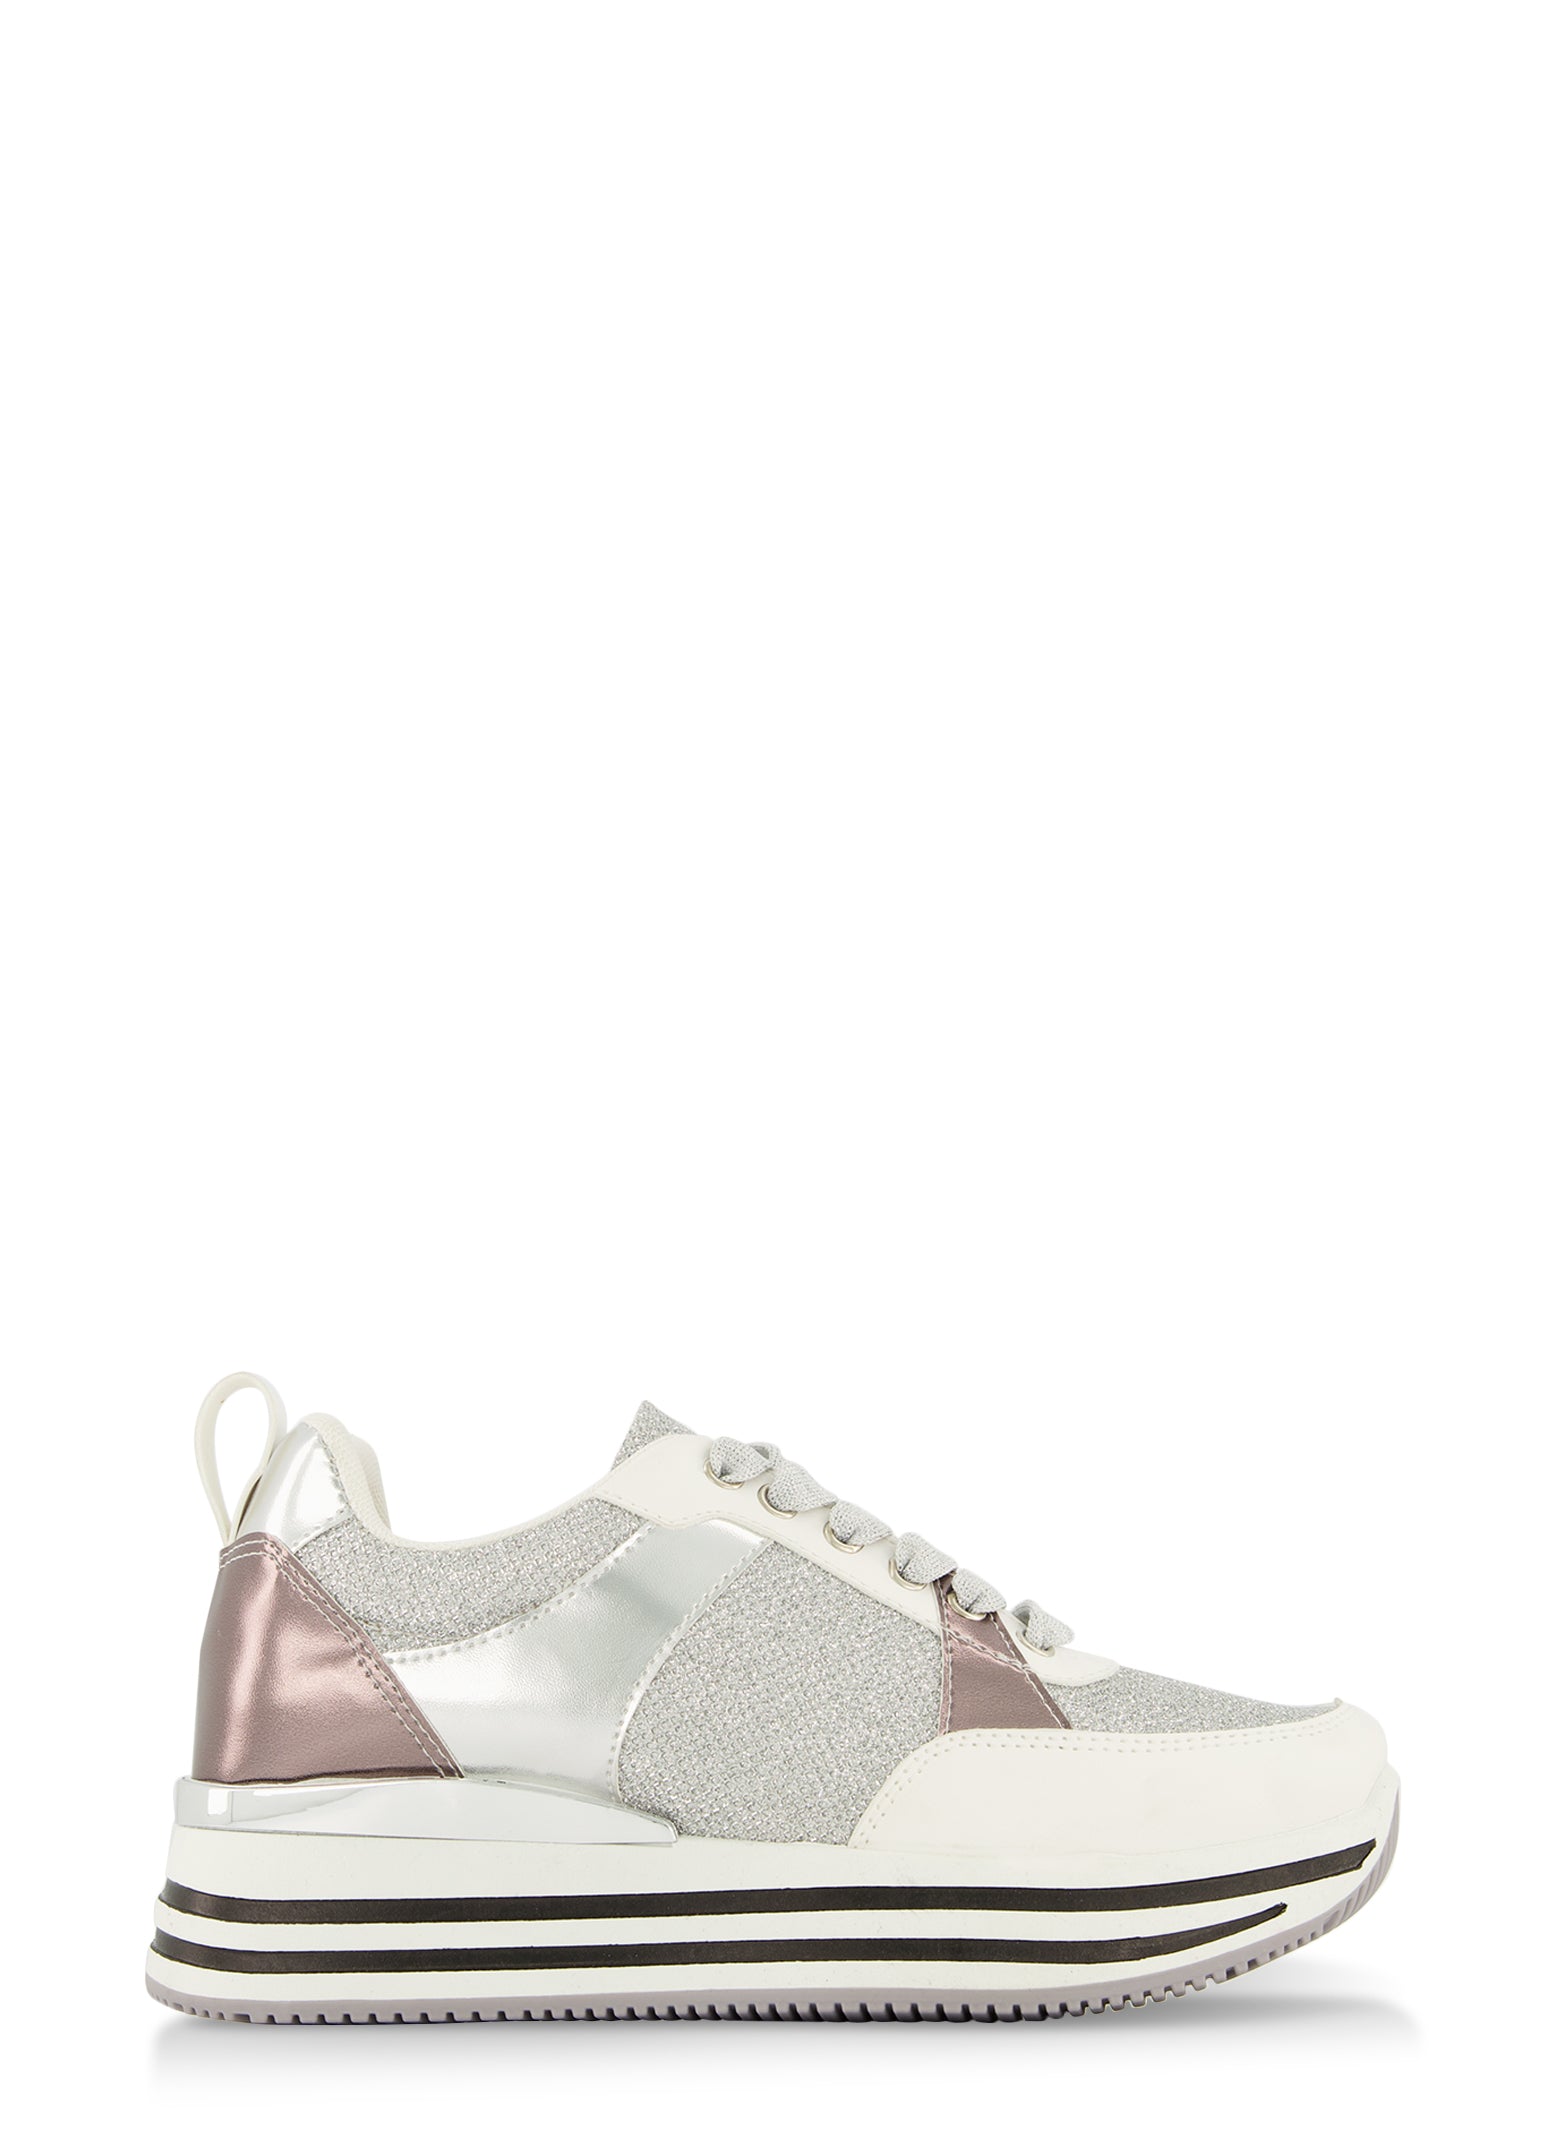 Anzai retort Forsøg Striped Sole Lace Up Platform Sneakers - White